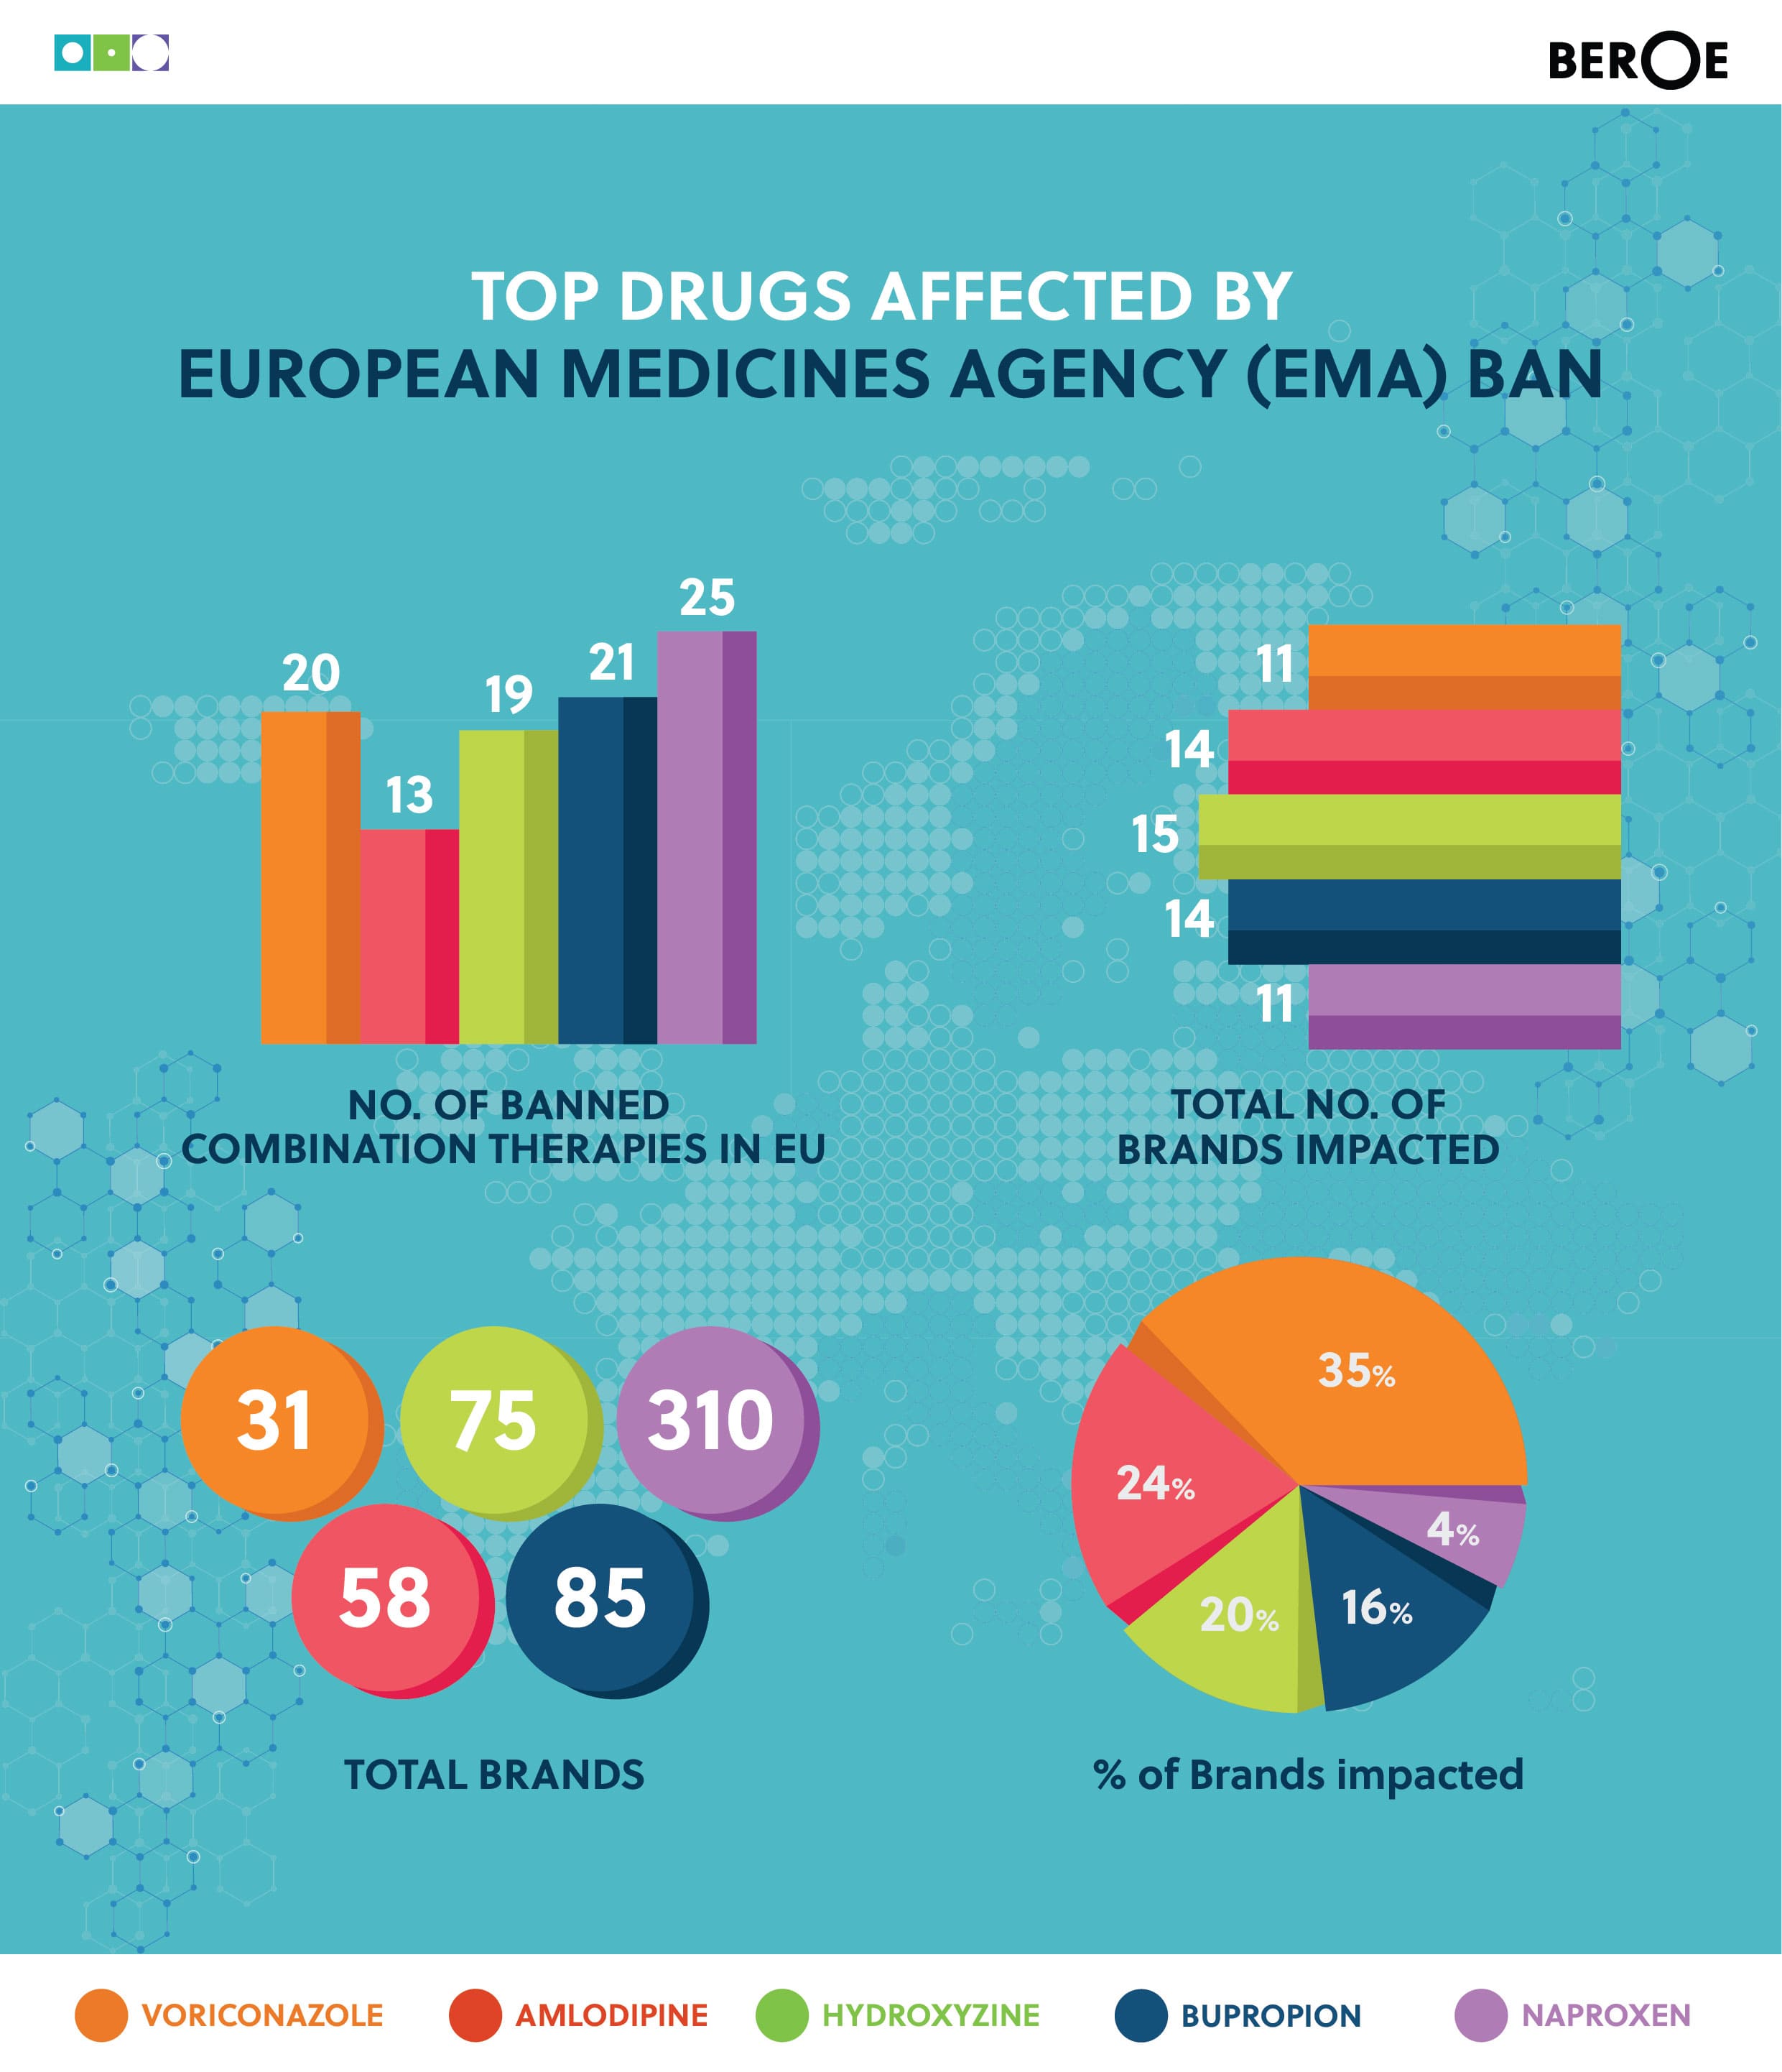 Top drugs affected by European Medicines Agency (EMA) ban